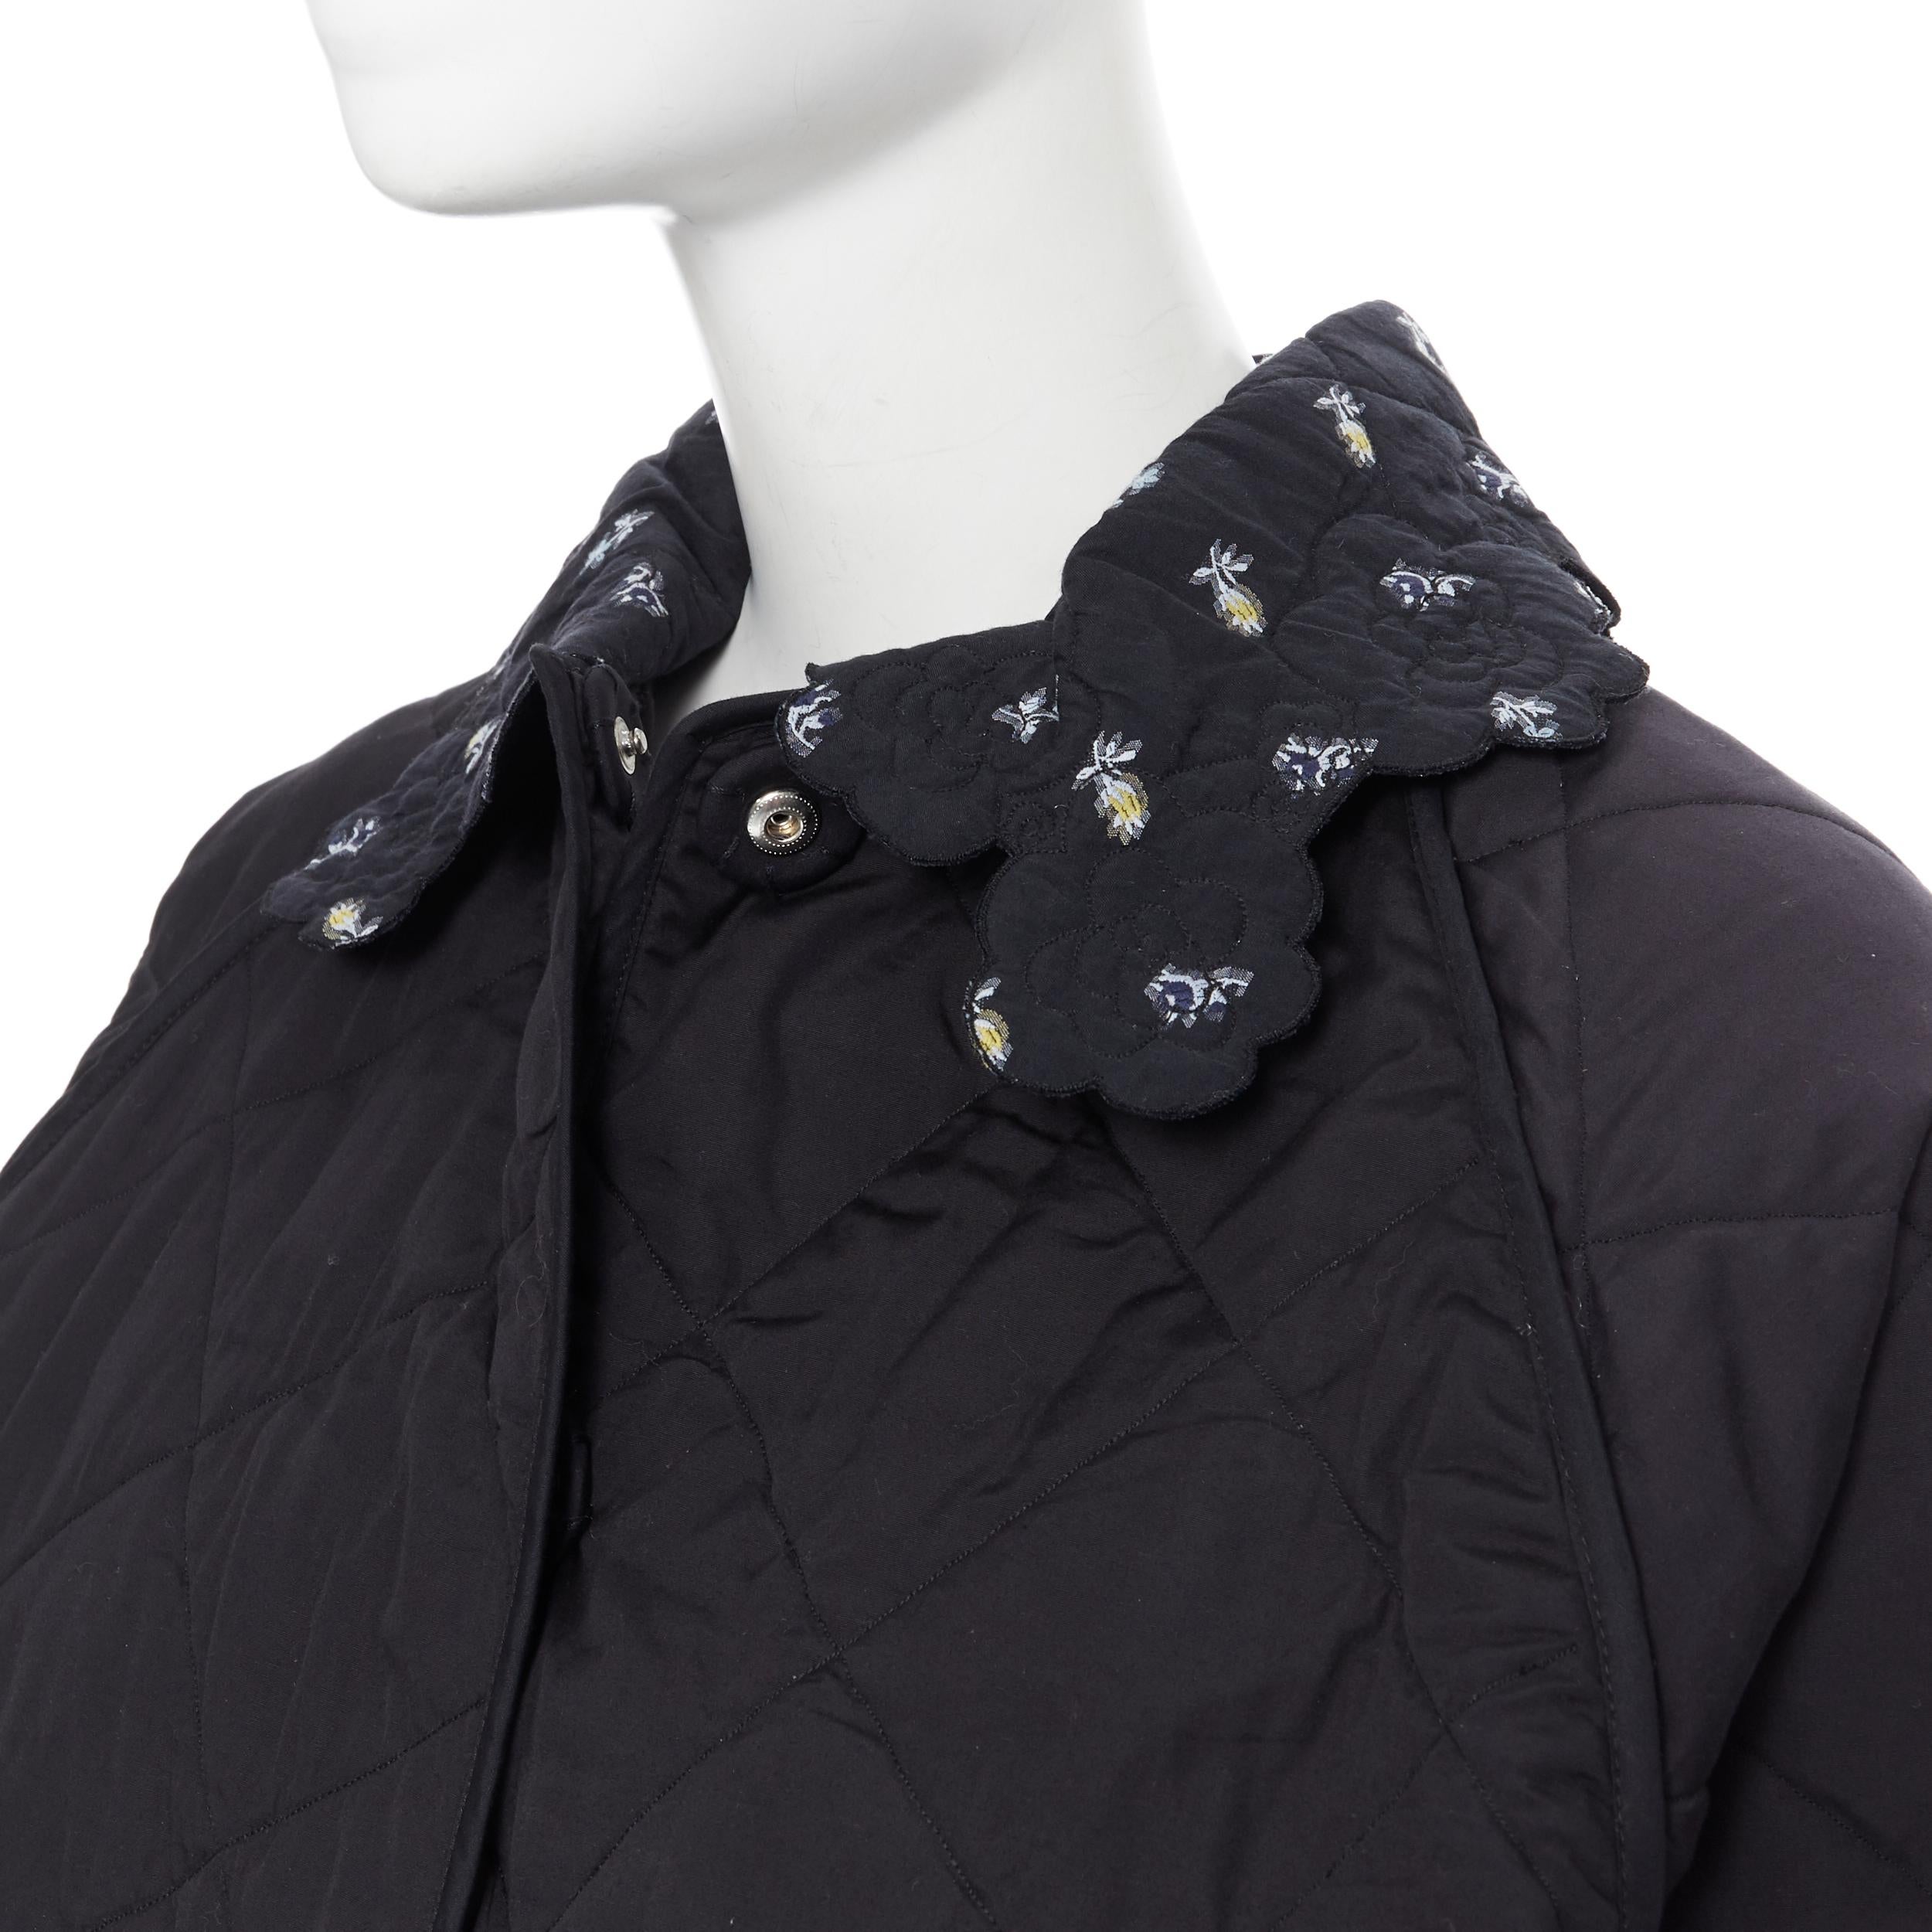 new CECILIE BAHNSEN Ana quilted patchwork black floral oversized cocoon coat UK6
Brand: Cecilie Bahnsen
Designer: Cecilie Bahnsen
Model Name / Style: Padded jacket
Material: Cotton
Color: Black
Pattern: Floral
Closure: Button
Extra Detail: Scalloped